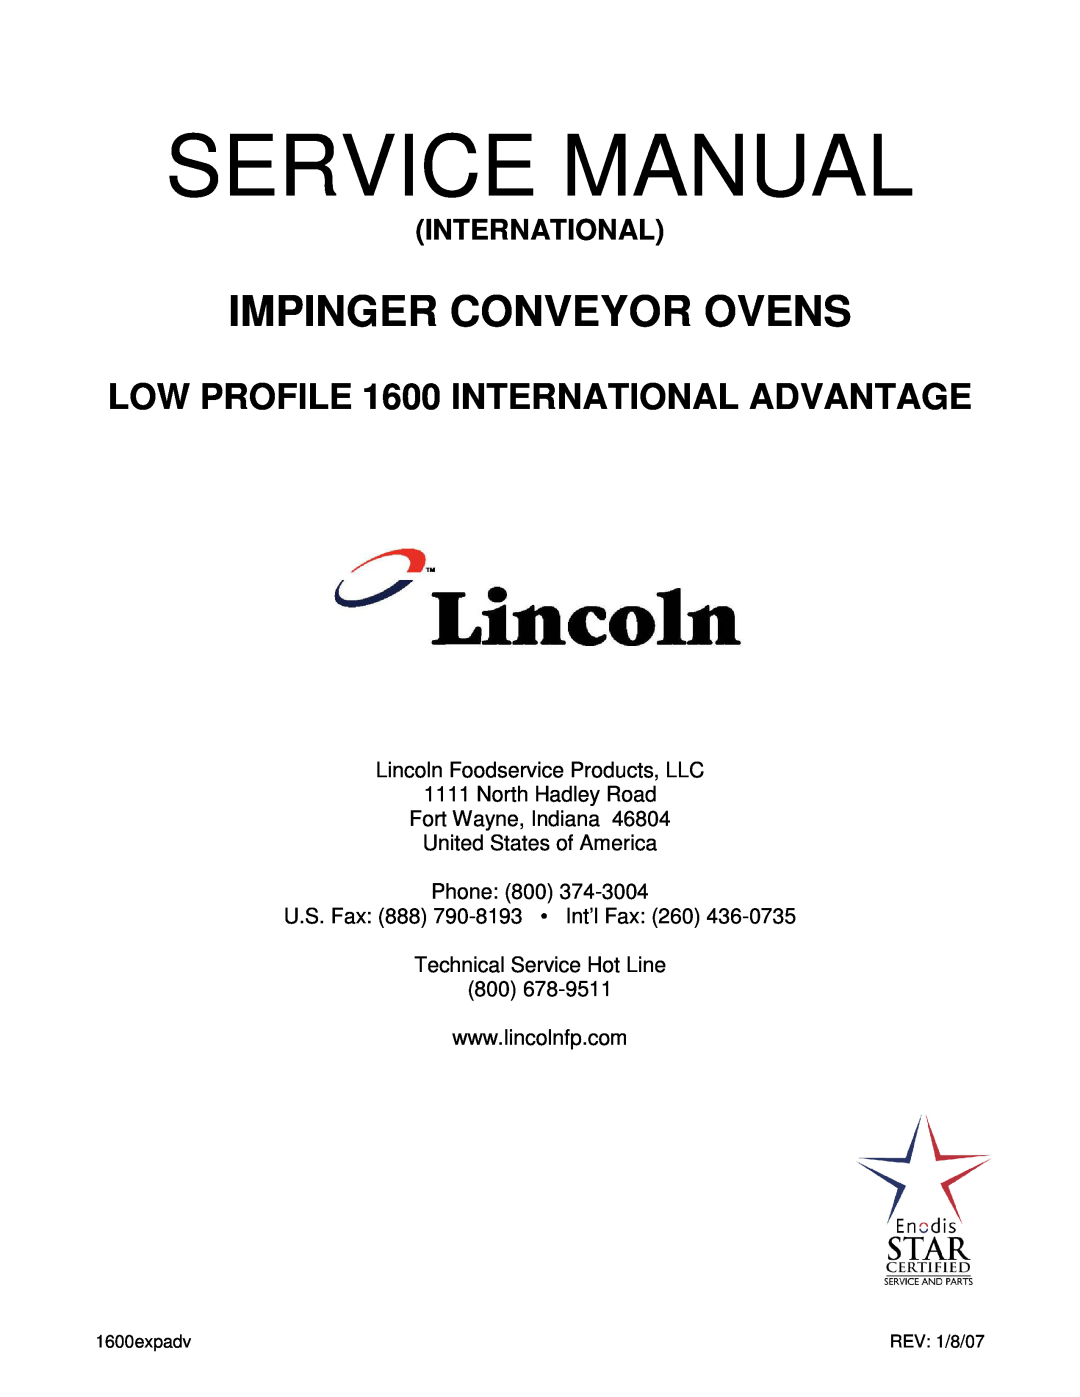 Lincoln 1633-000-EA service manual Lincoln Foodservice Products, LLC, North Hadley Road Fort Wayne, Indiana, 1600expadv 